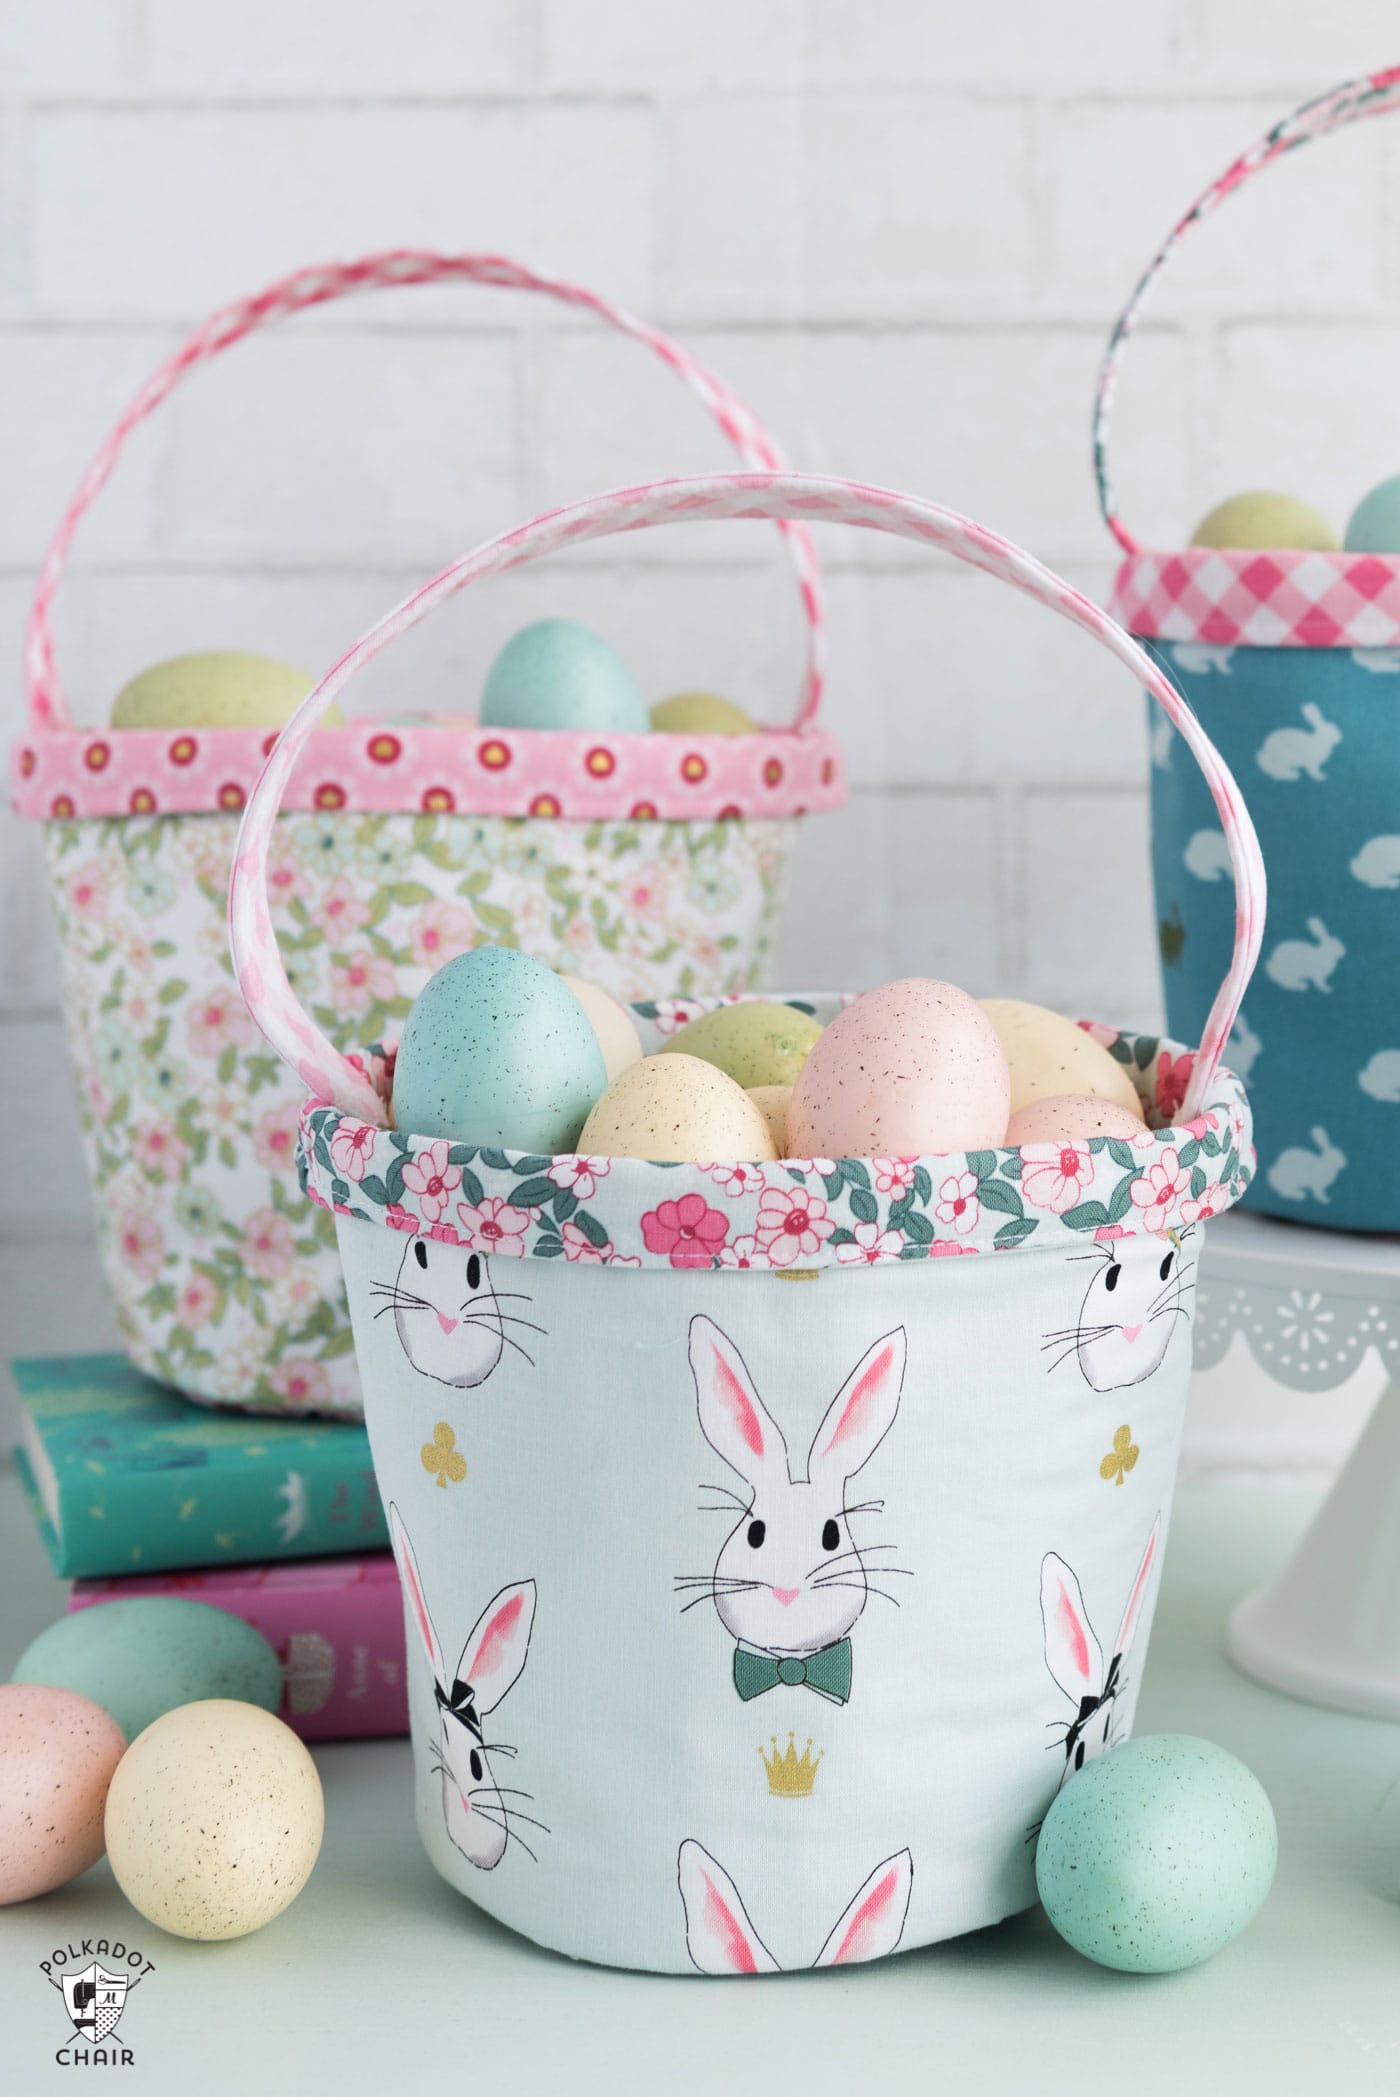 Free Easter Basket sewing tutorial - a cute little fabric basket perfect for Spring!